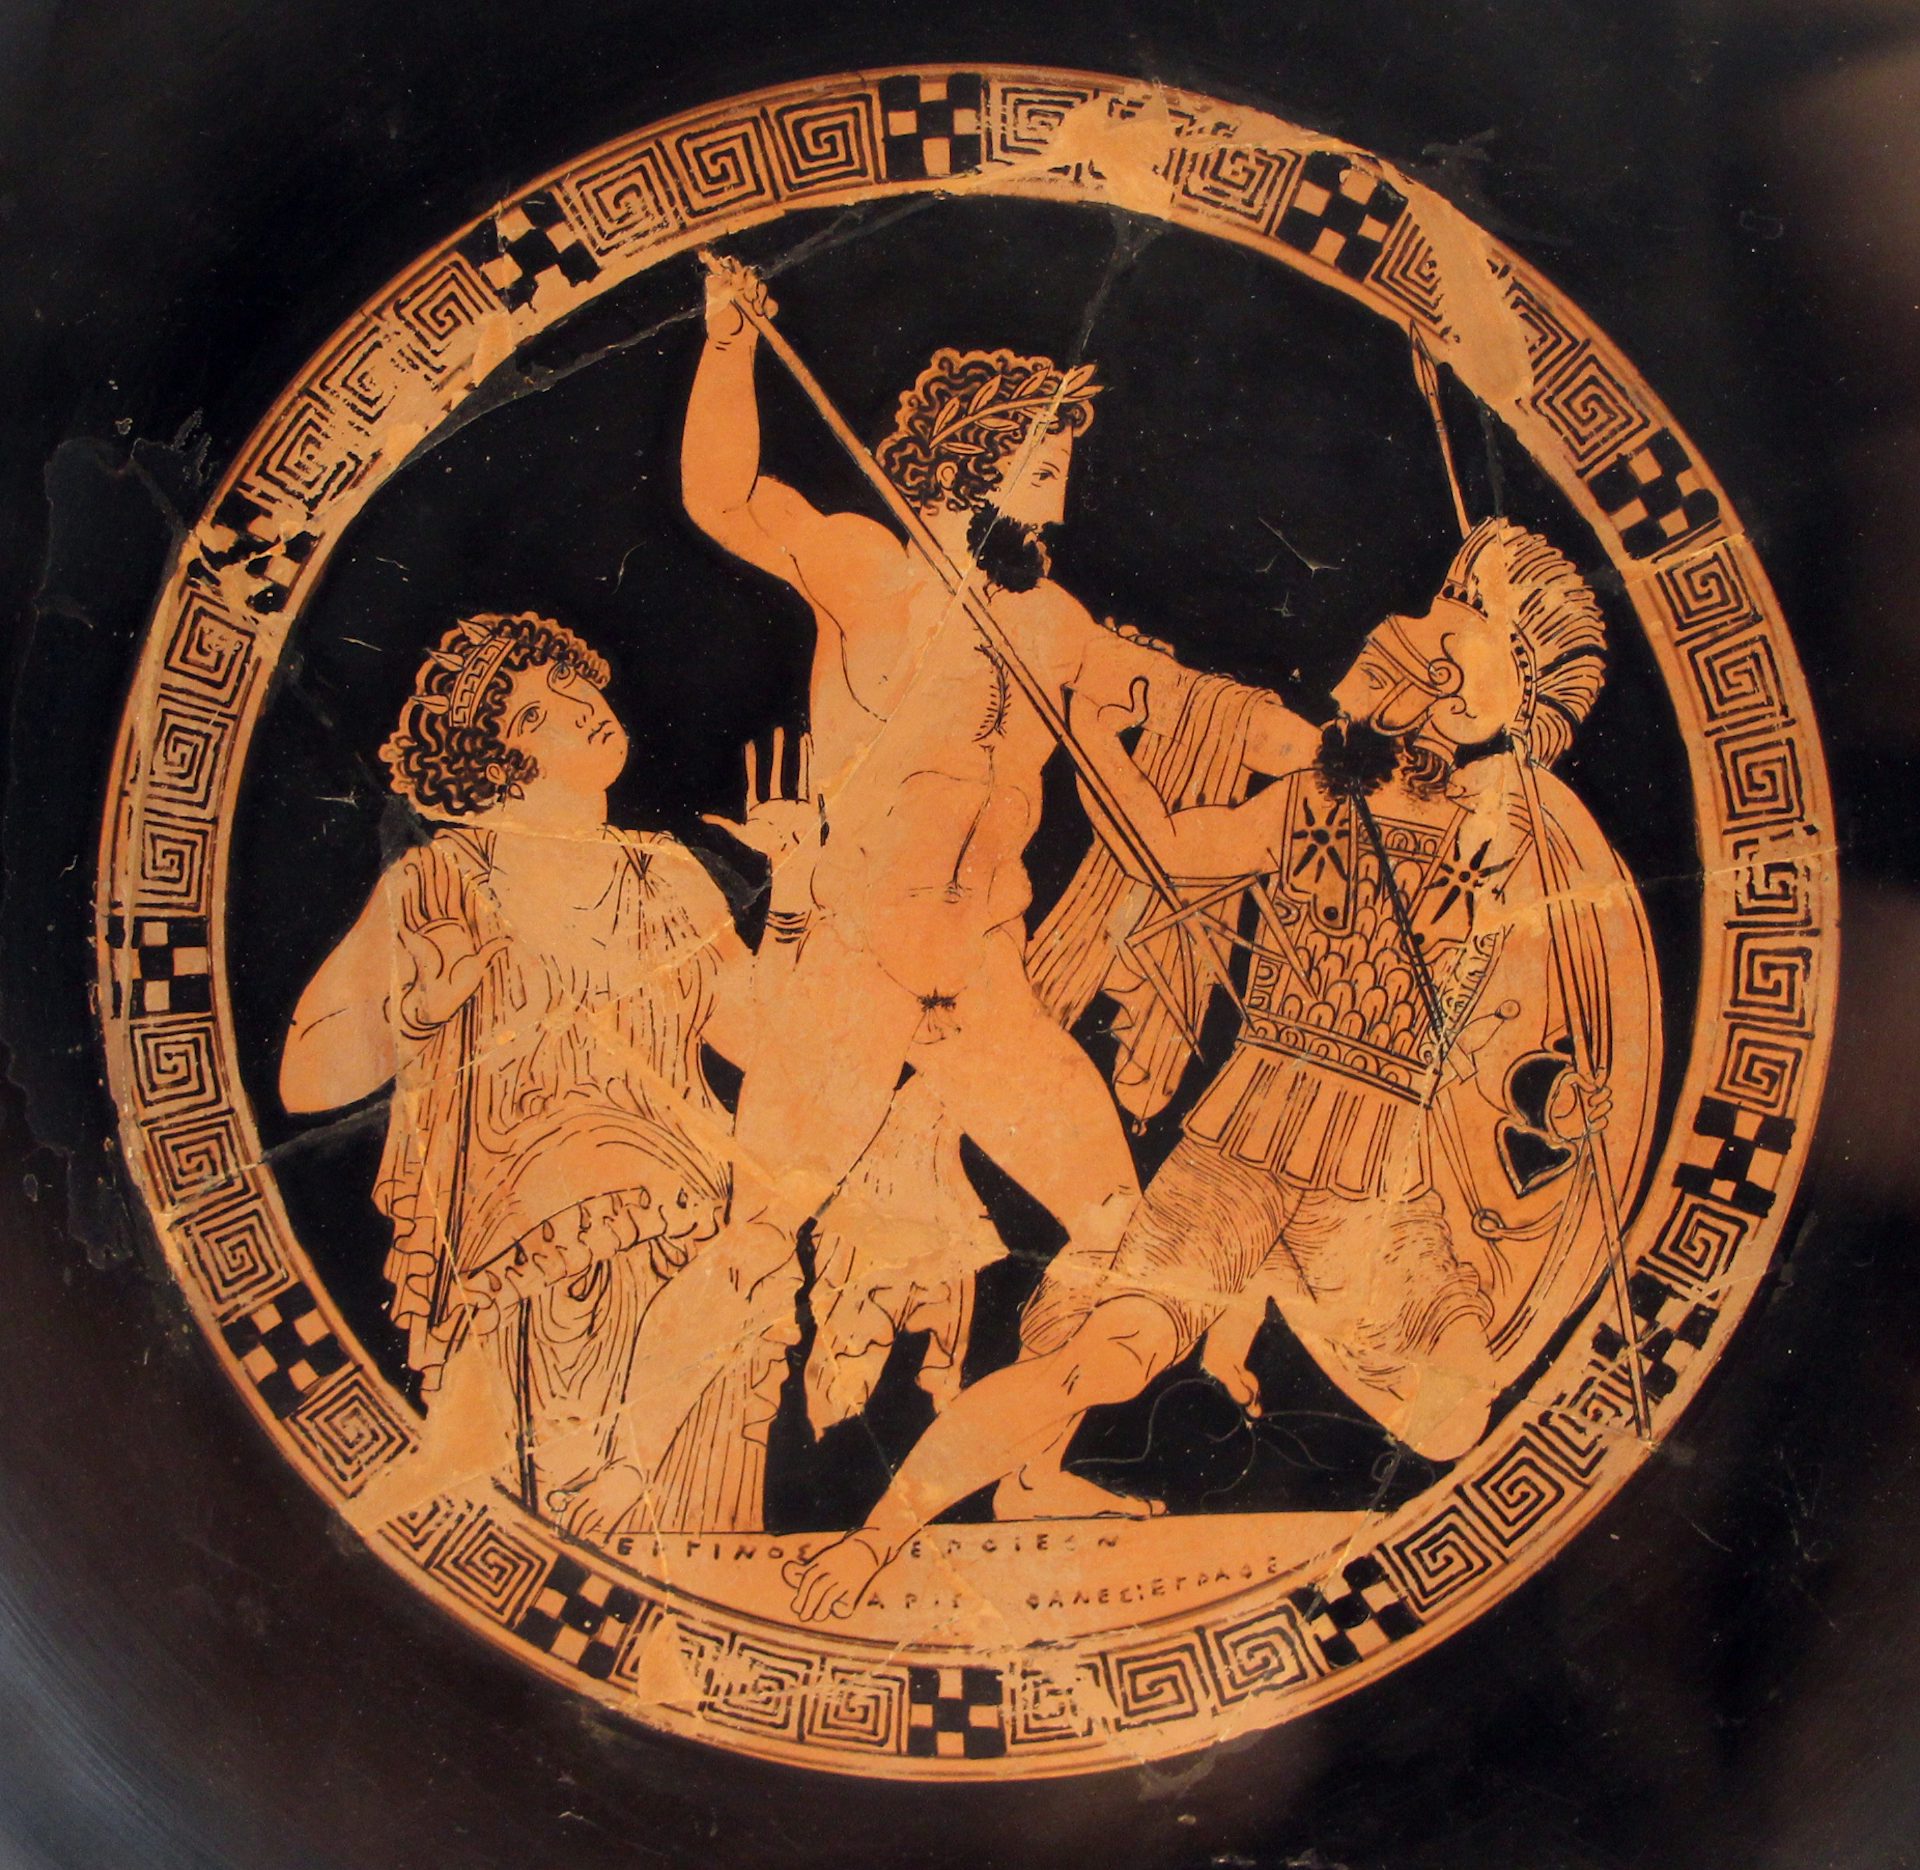 Vase painting showing Poseidon killing the Giant Polybotes by Aristophanes and Erginus